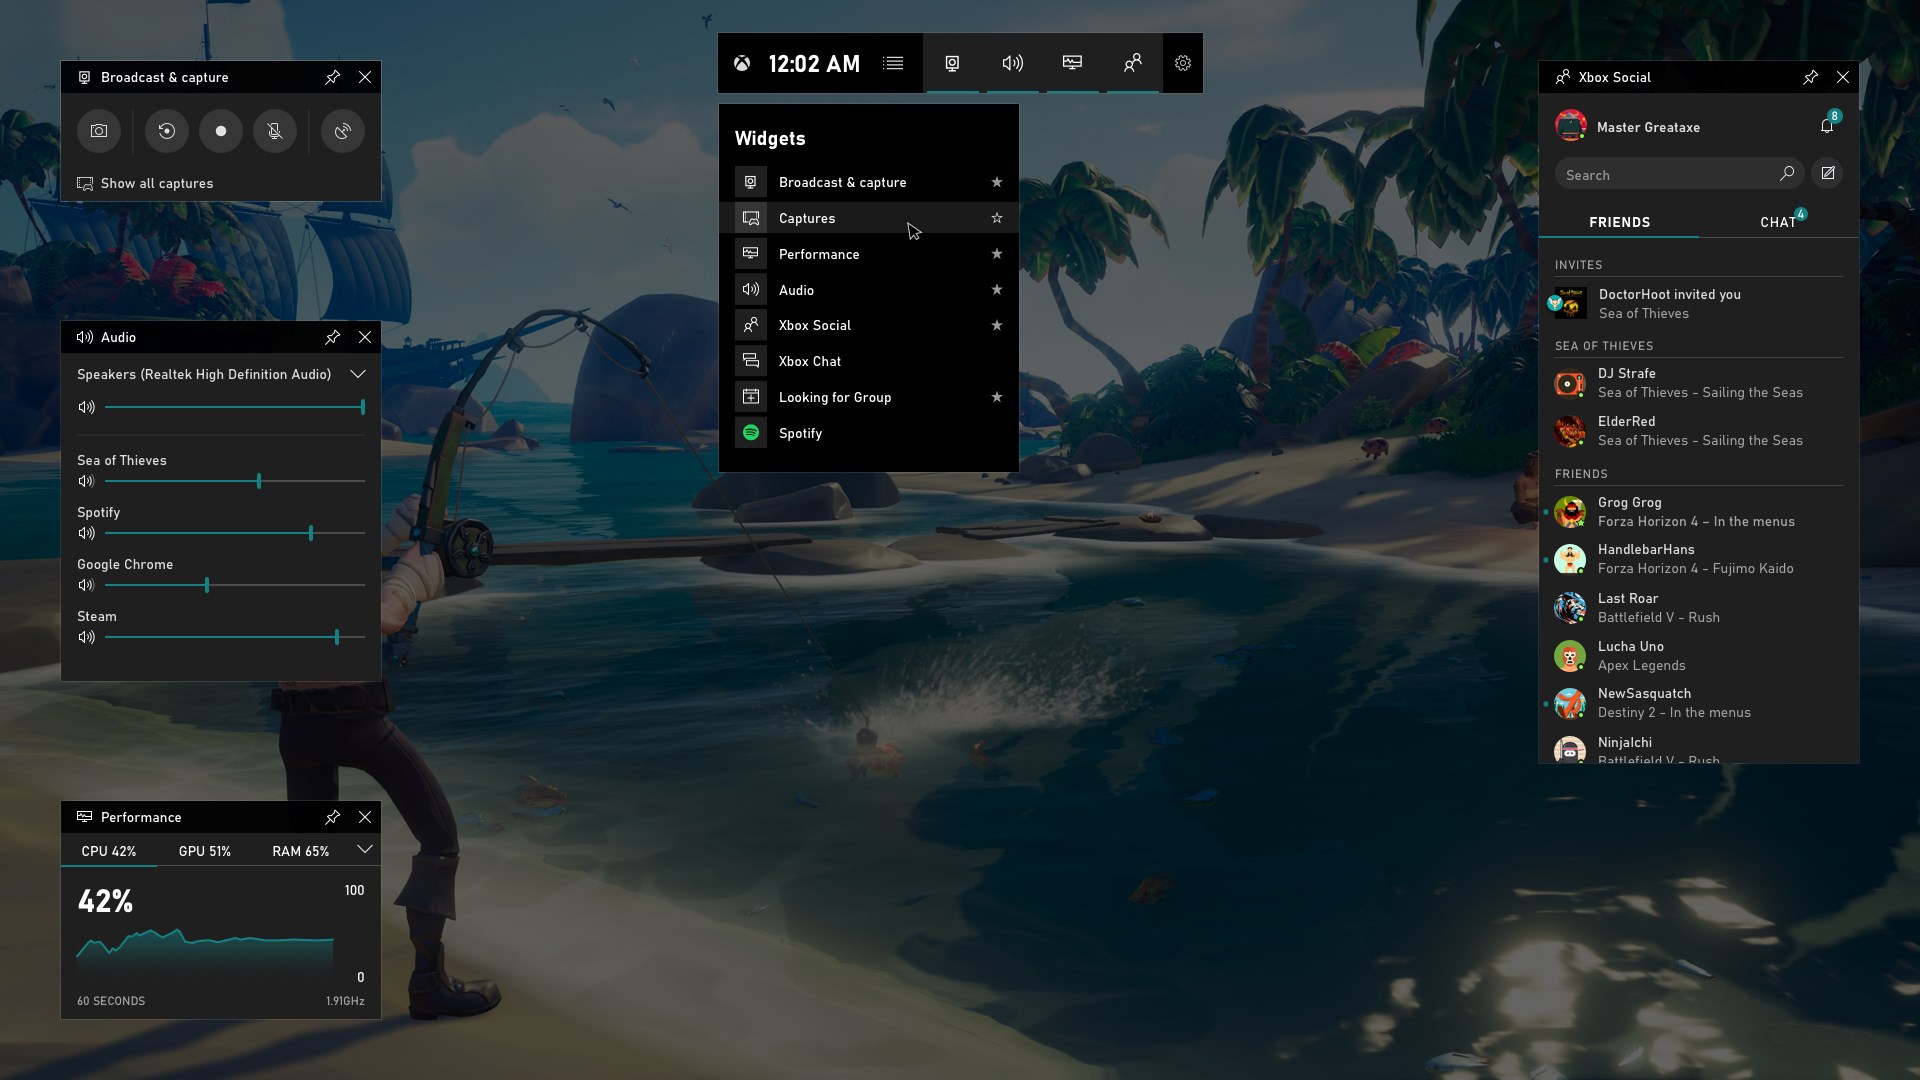 How to use Xbox Game Bar in Windows 10